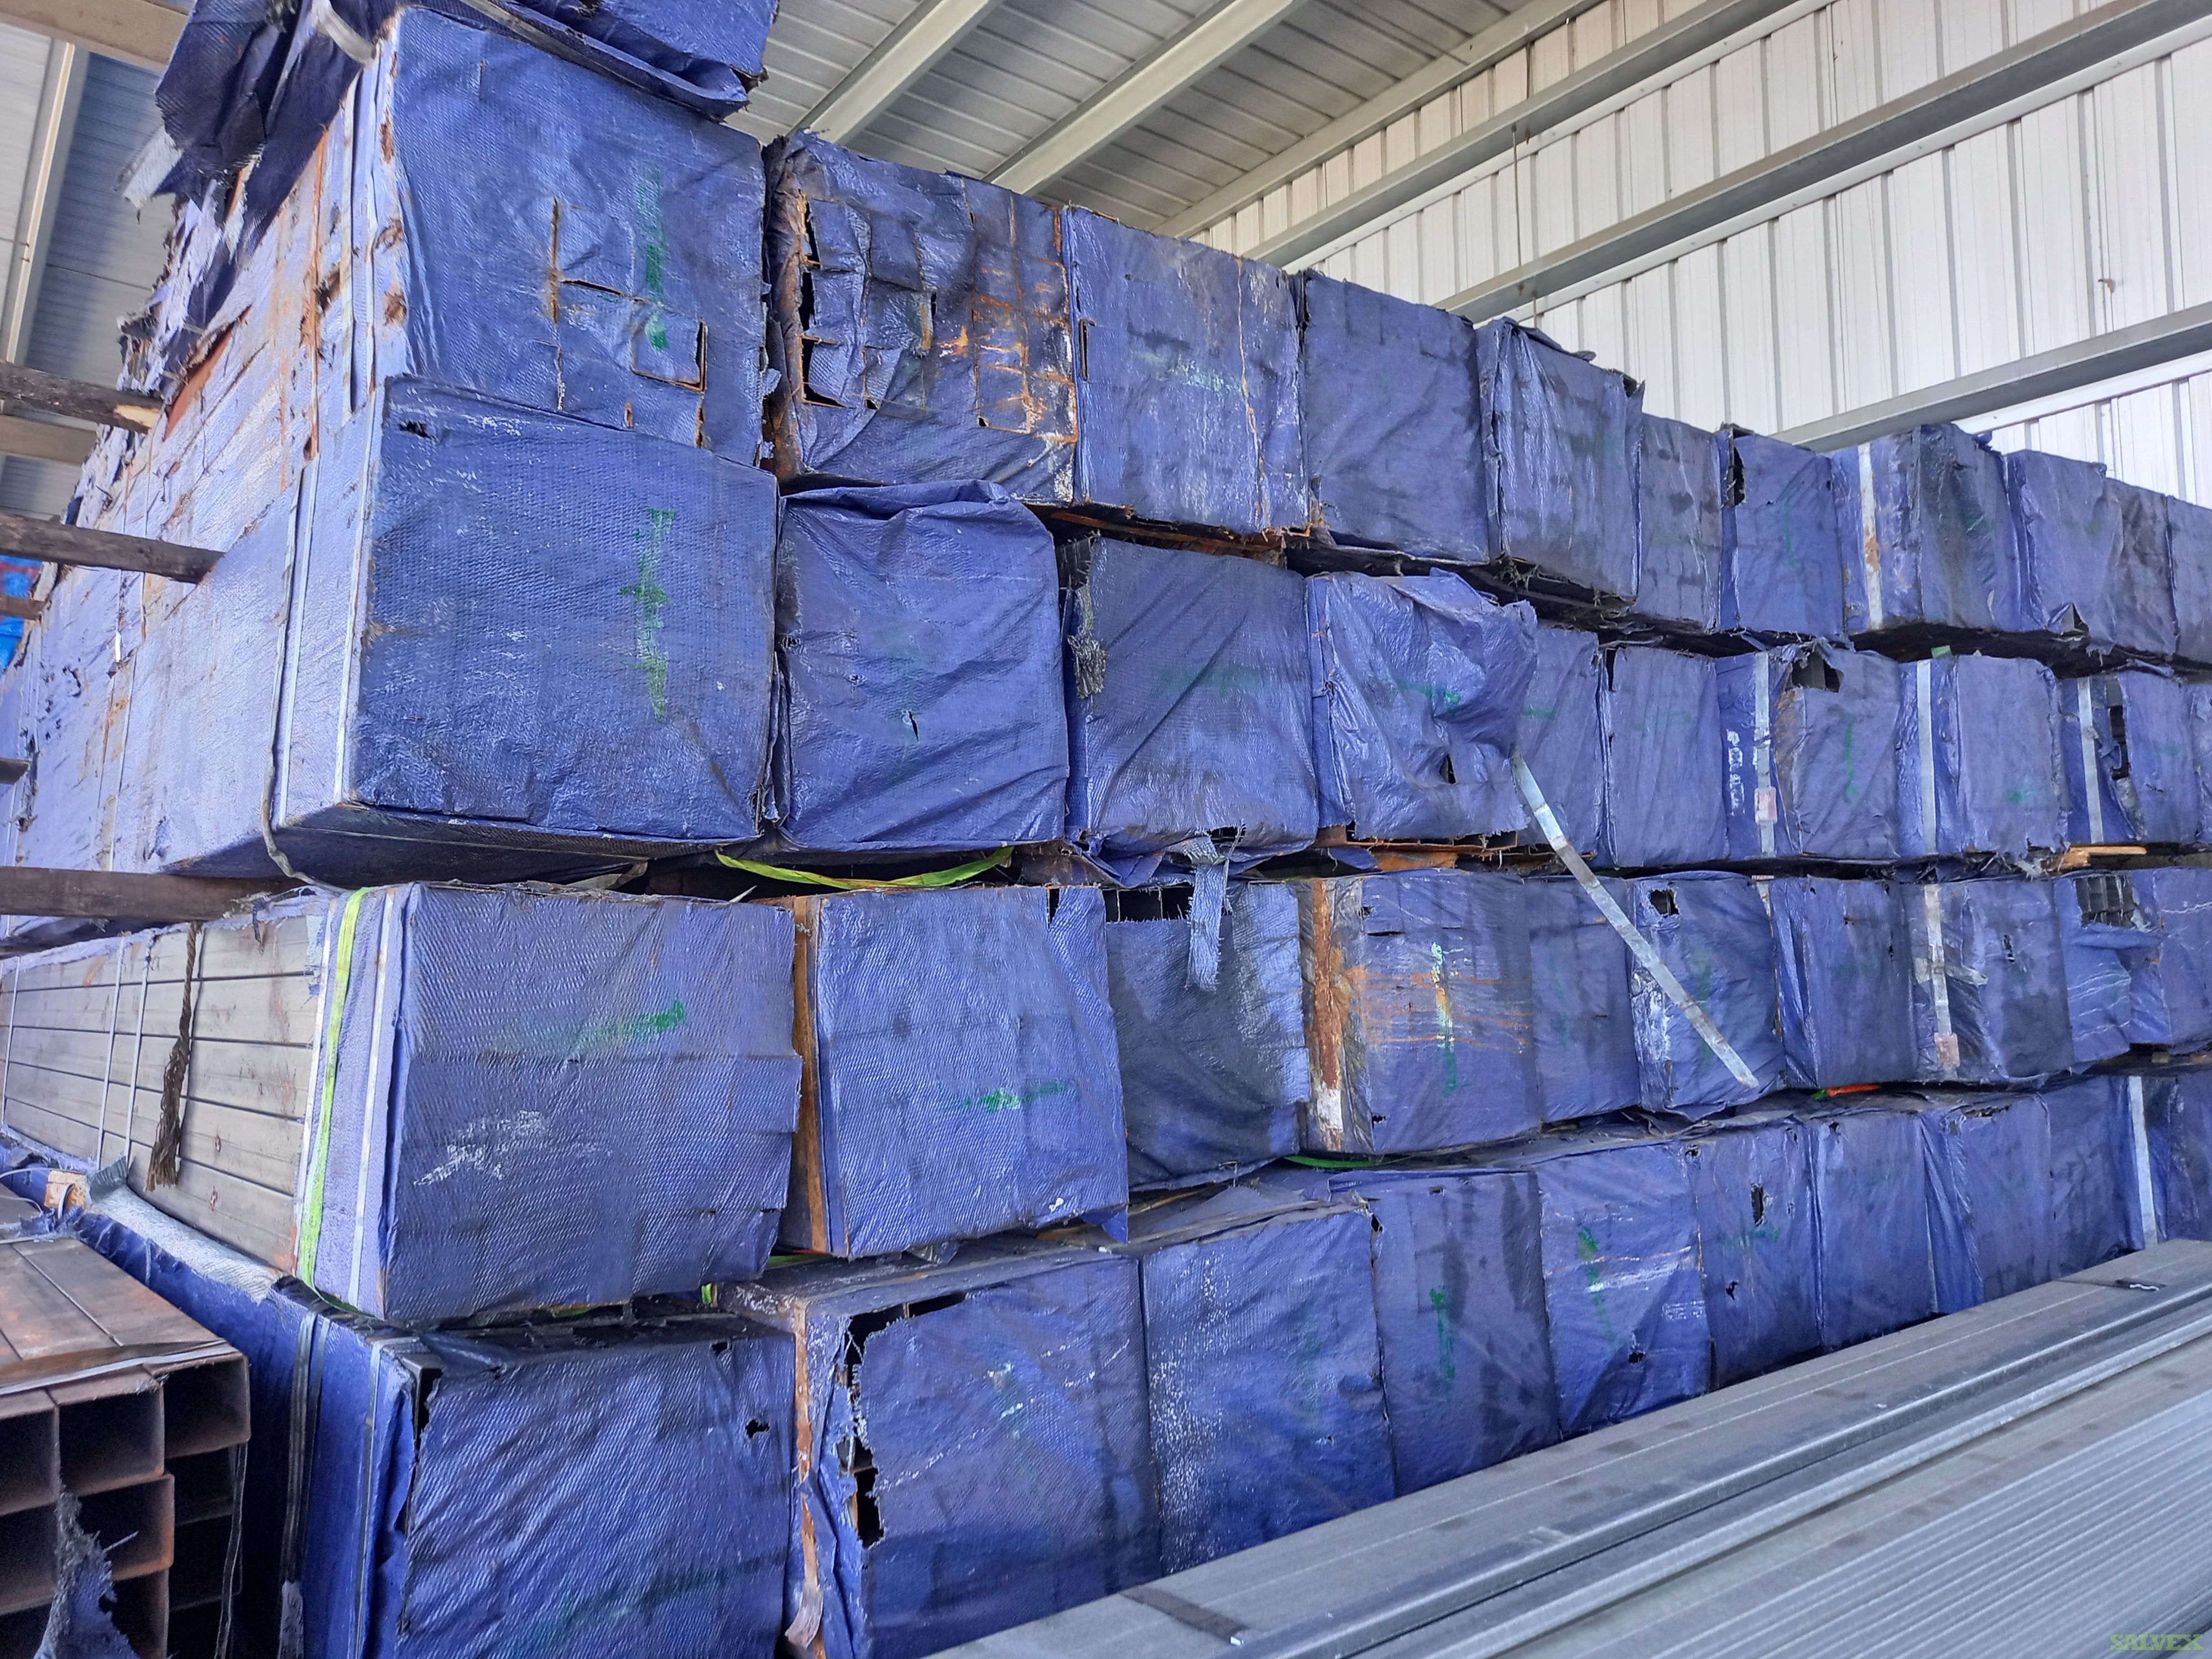 Hot Dipped Galvanized Steel Tubing ERW Steel Hollow Sections (170 MT)